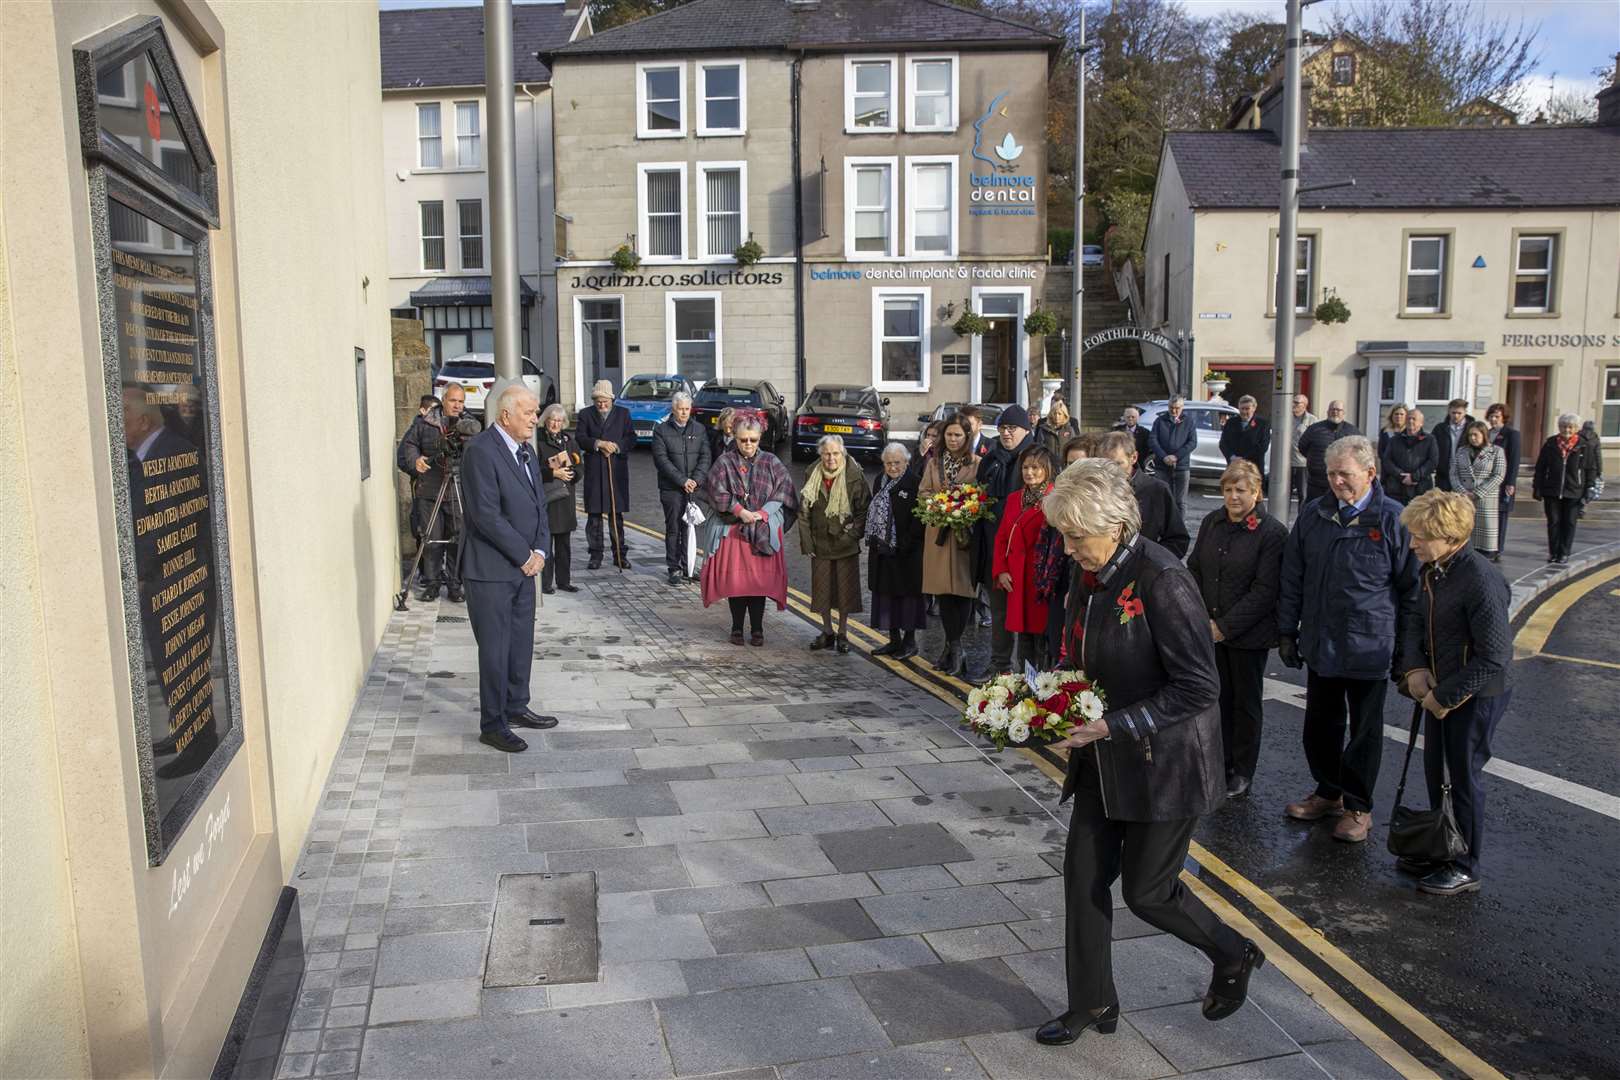 Relatives of those killed lay a wreath during an act of remembrance to mark the 35th anniversary of the Enniskillen bomb (Liam McBurney/PA)